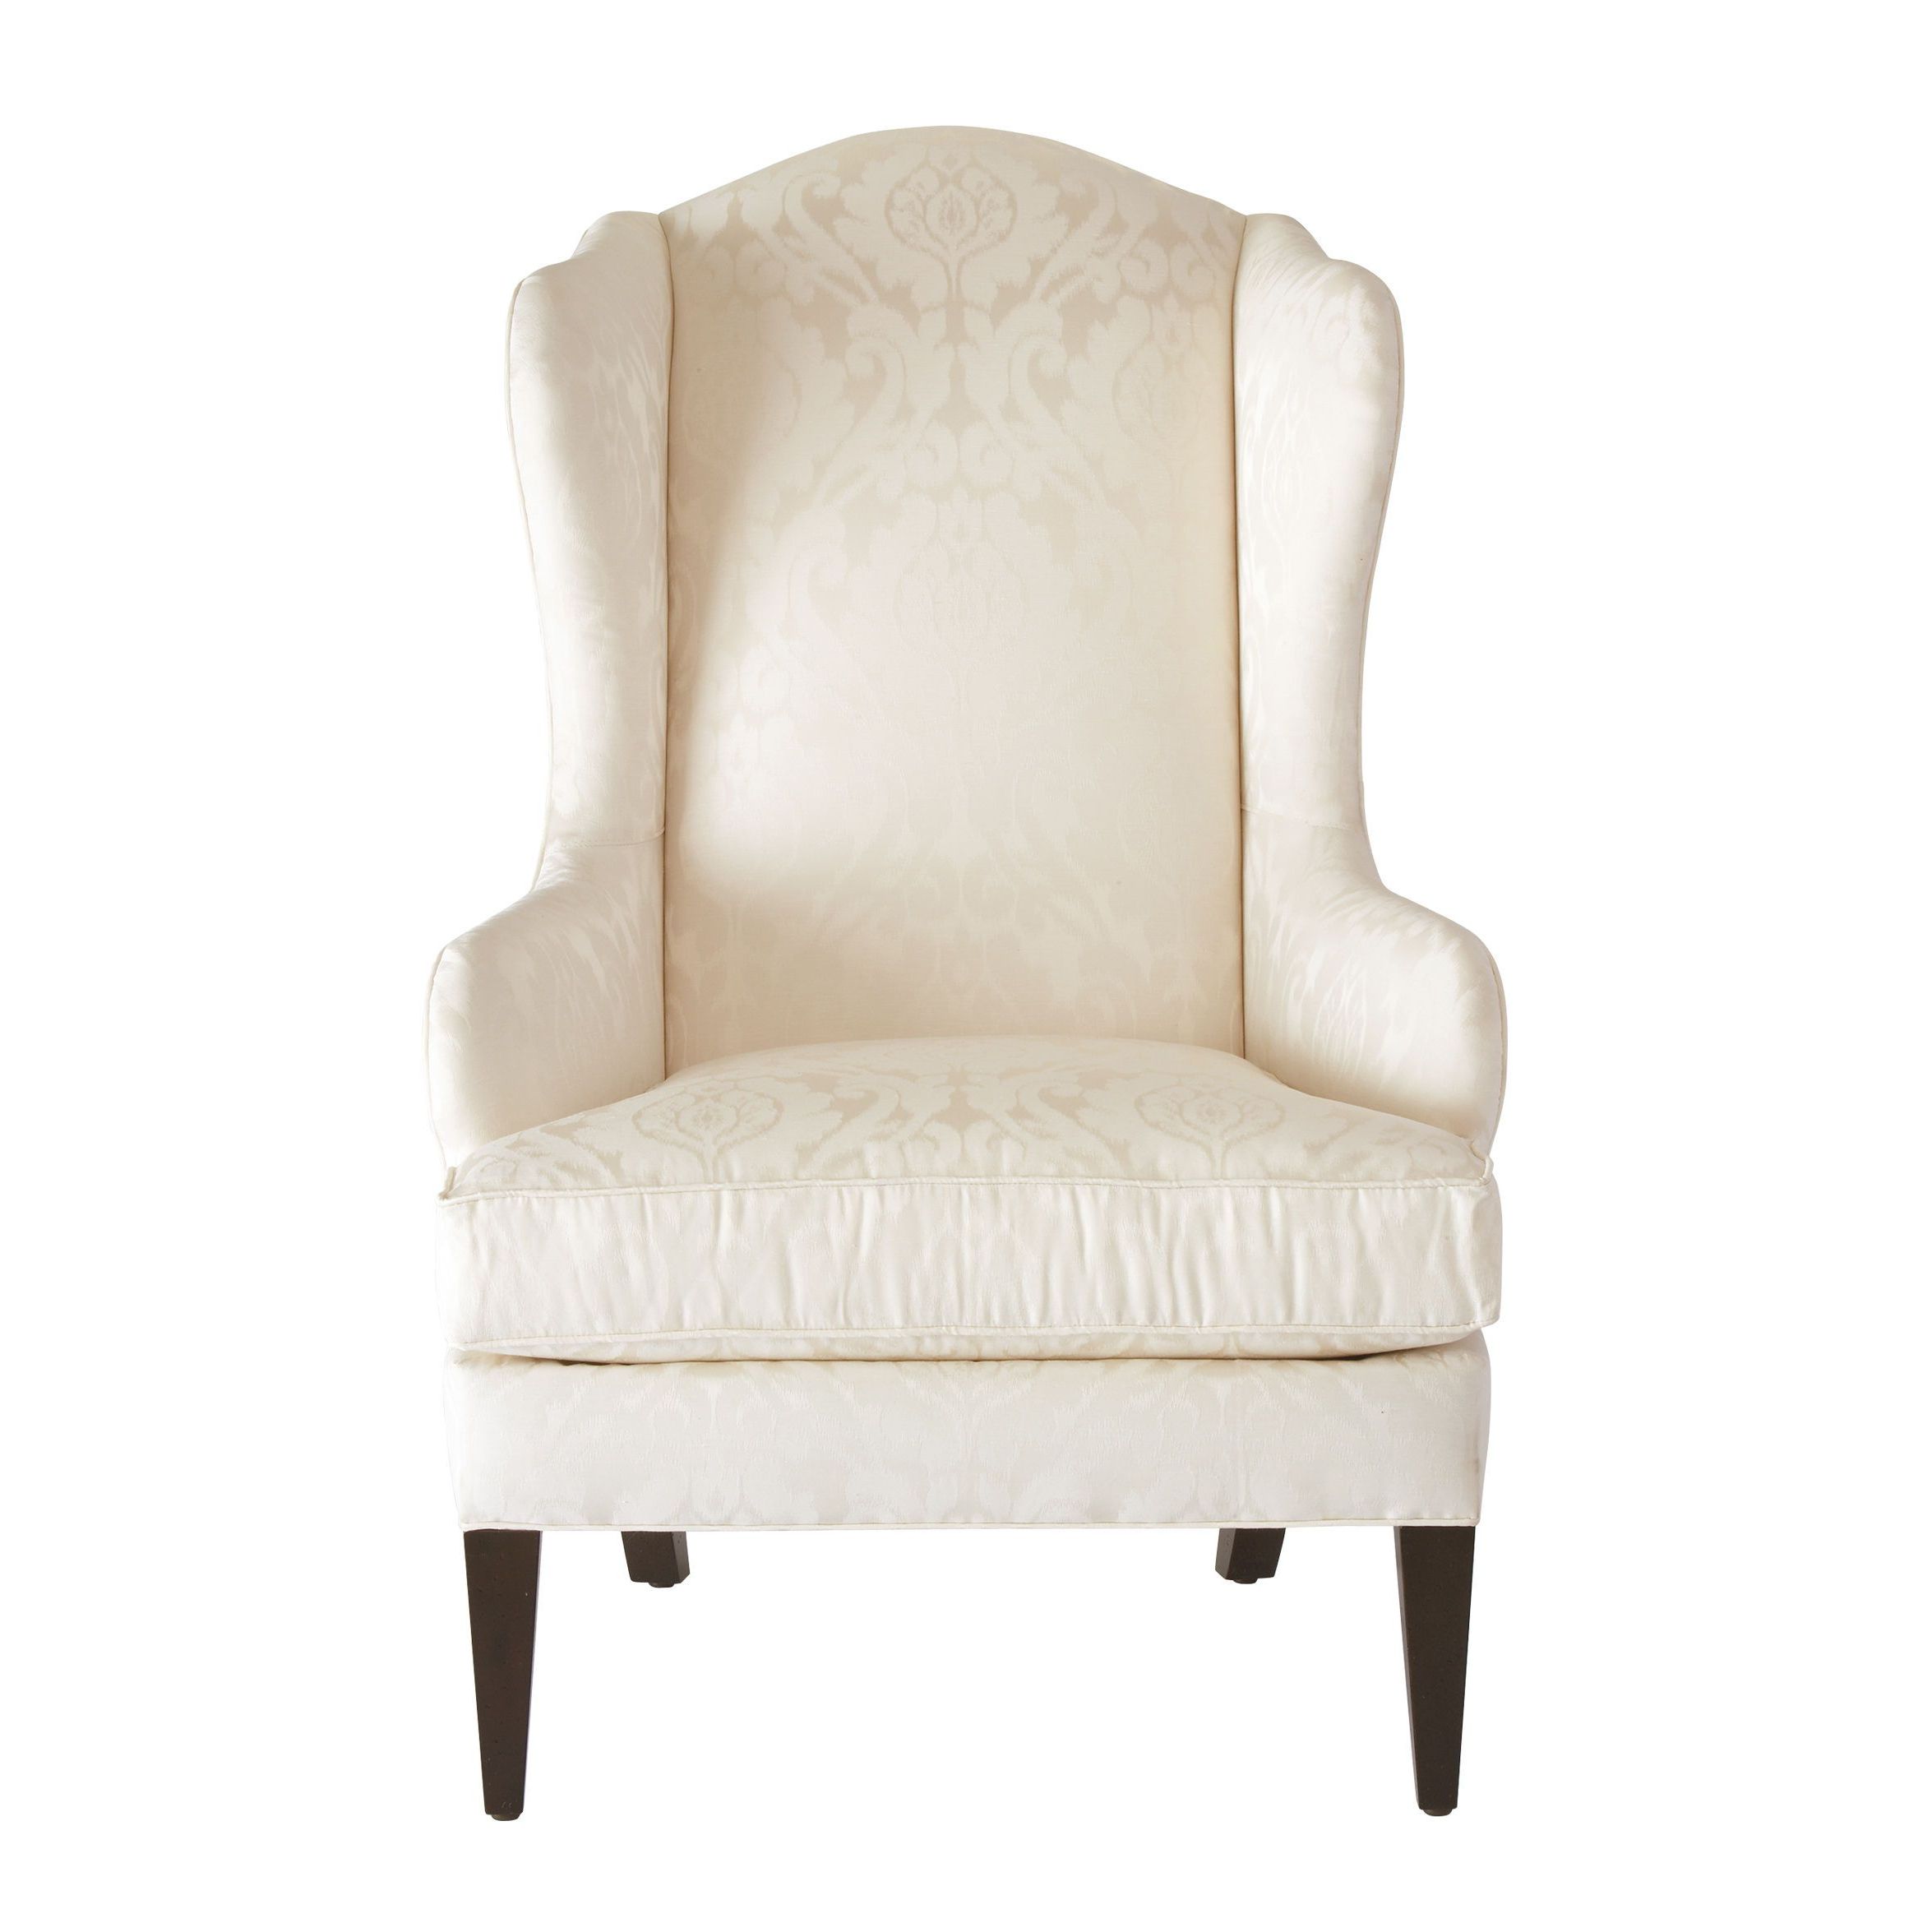 Selby Armchairs For Current Selby Wing Chair – Ethan Allen Us (View 1 of 20)